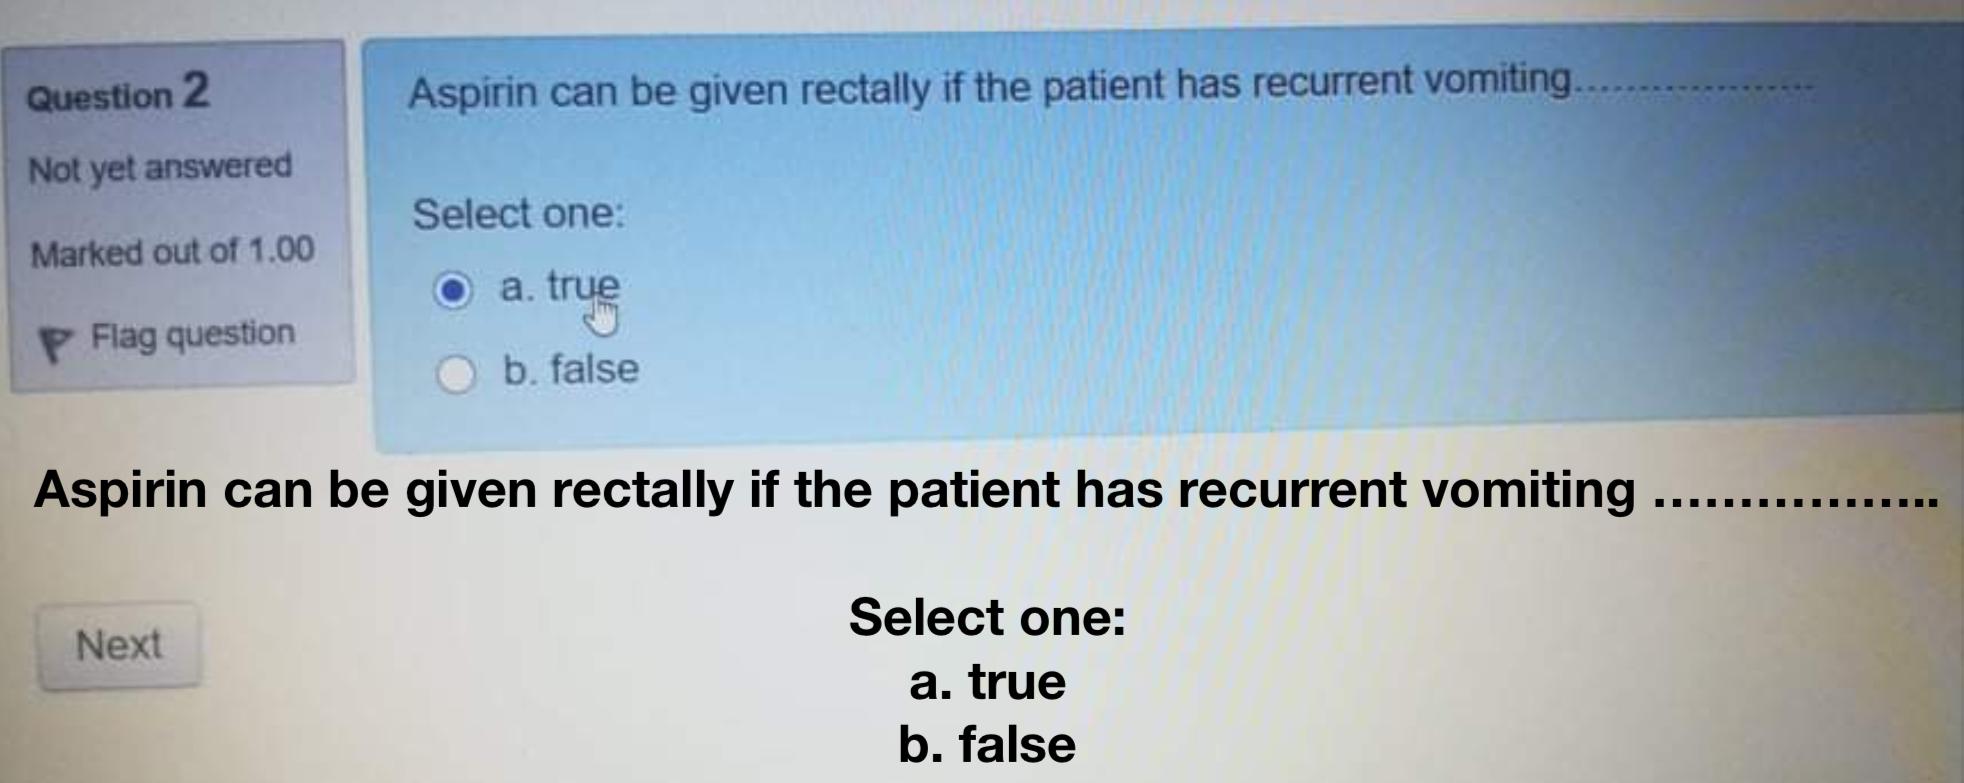 Question 2 Not yet answered Marked out of \( 1.00 \) P Flag question Aspirin can be given rectally if the patient has recurre